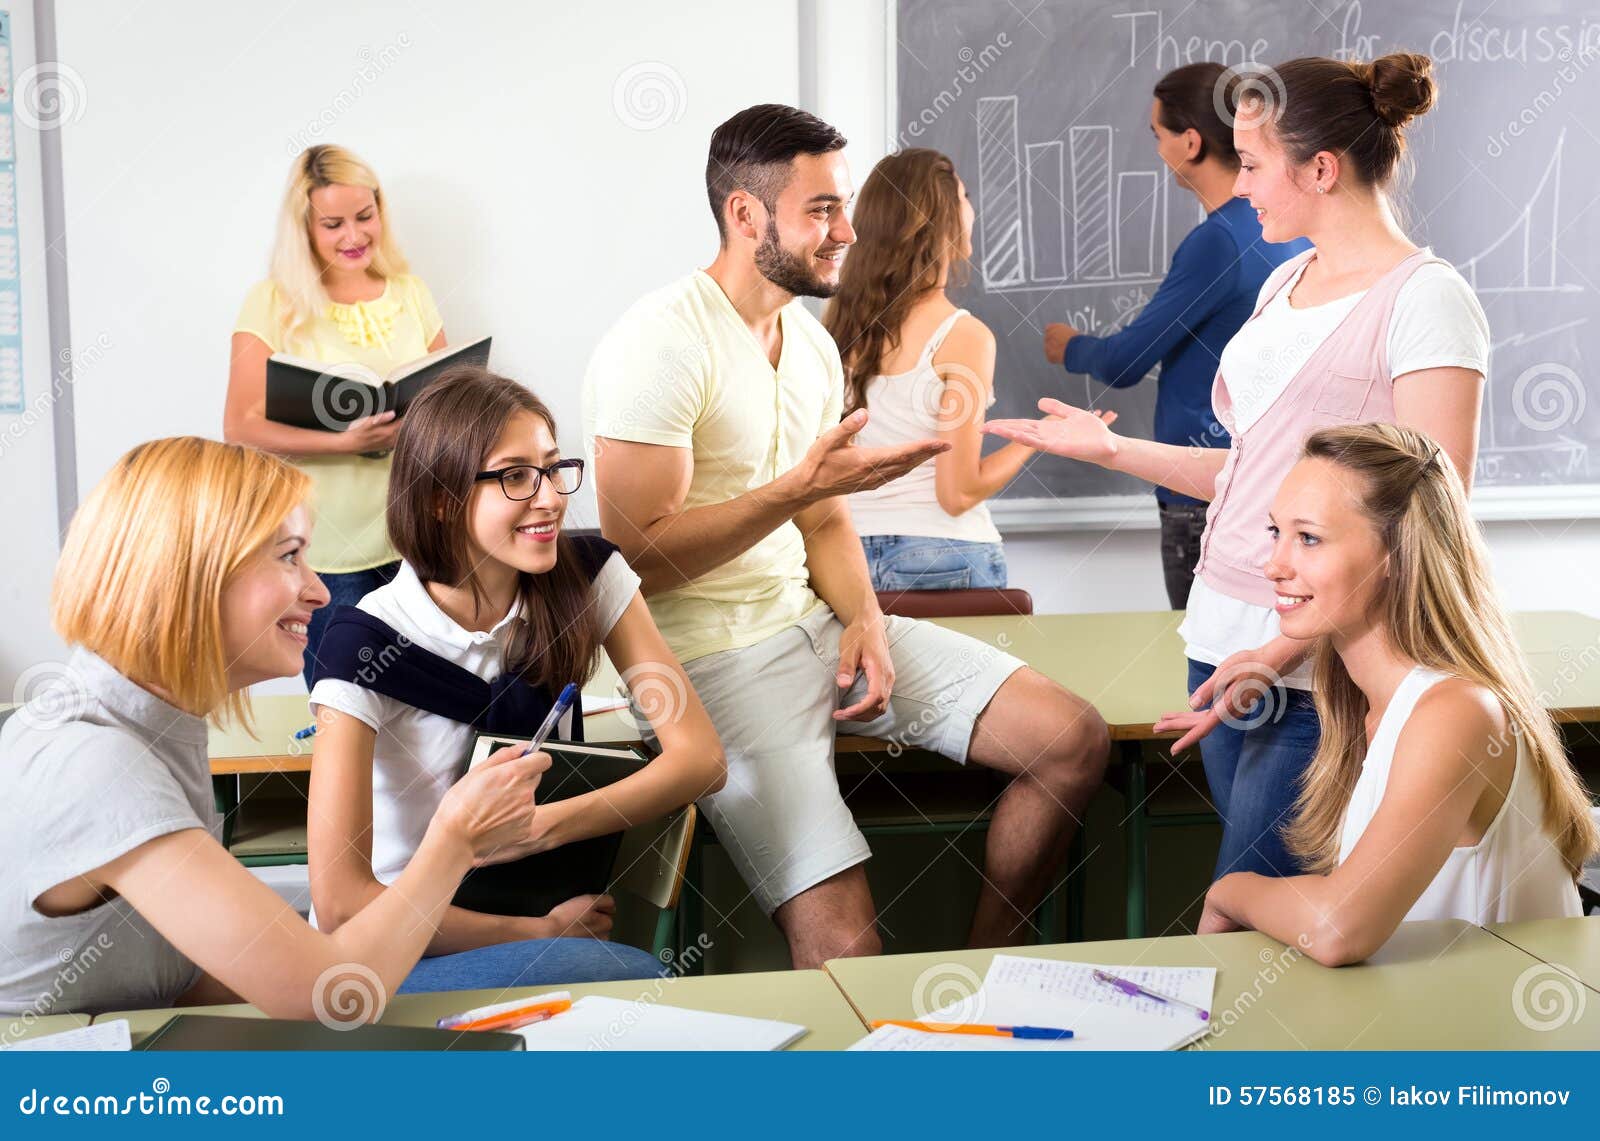 Group Of Students Chatting In Classroom Stock Image - Image of informal,  caucasian: 57568185